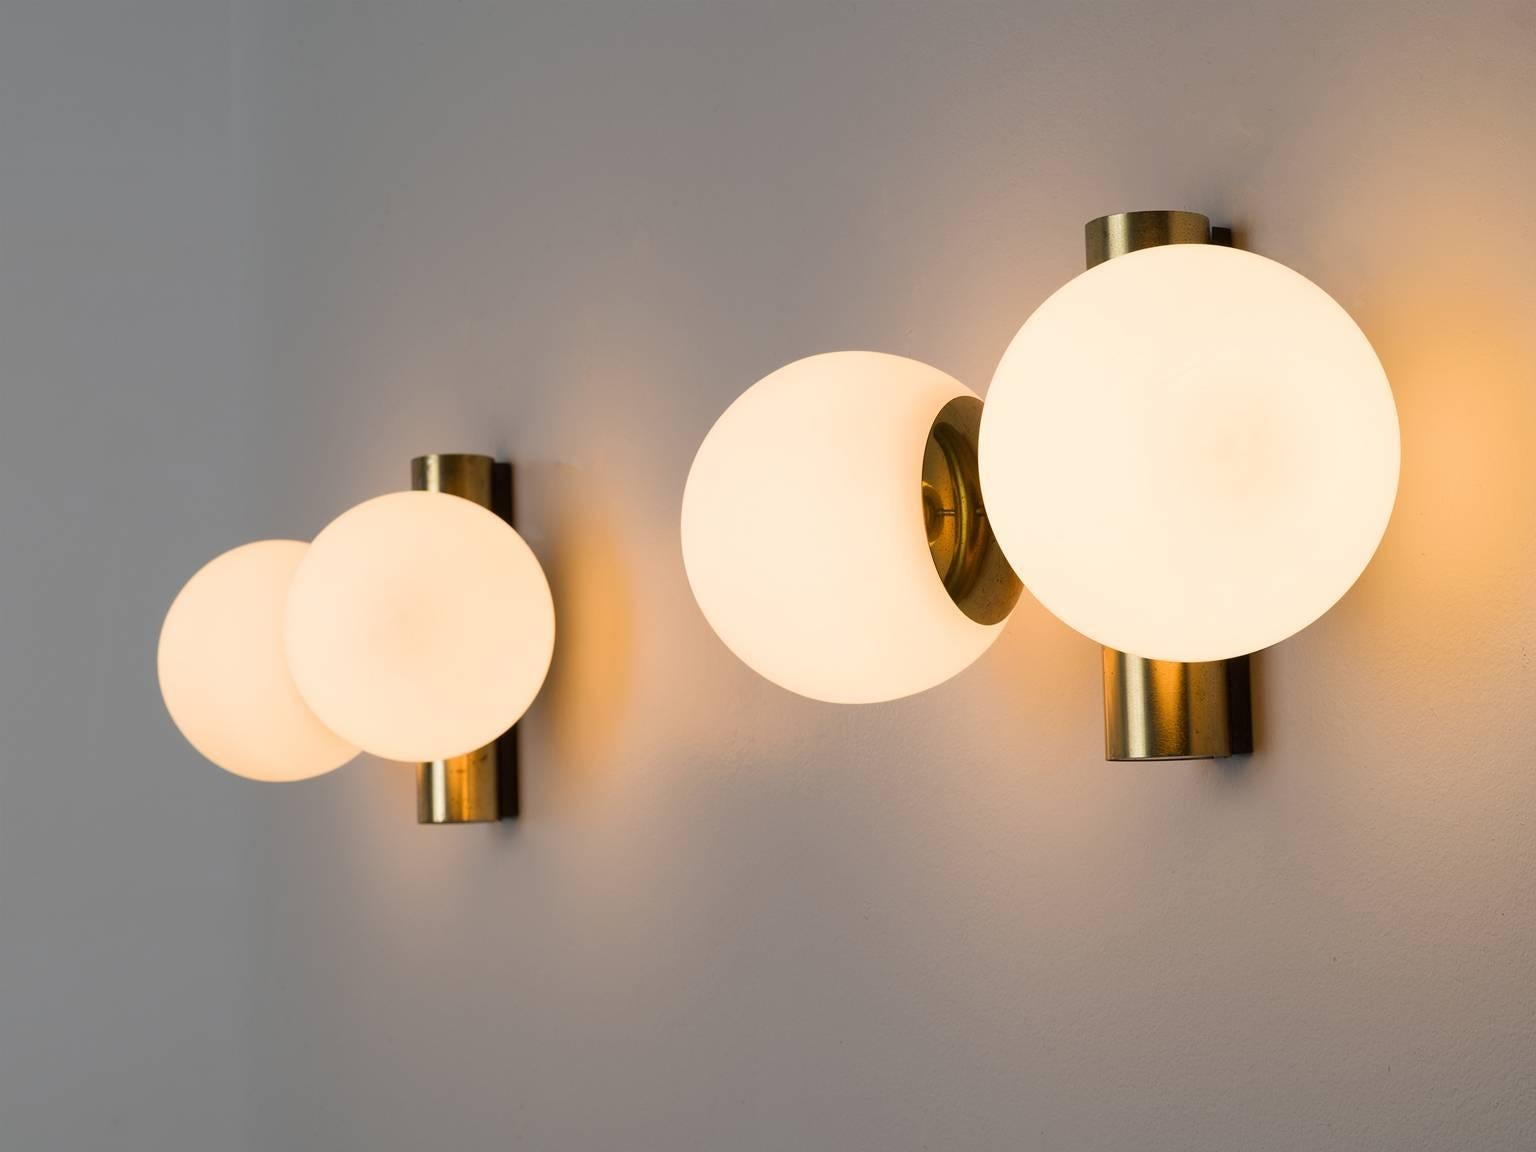 Wall lights in brass and opaline glass, Europe, 1960s. 

Set of two solid brass sconces with glass shades with a warm opaline white shade. The lights each have two short arms ending in a glass light bulb. These wall scones have a very natural light